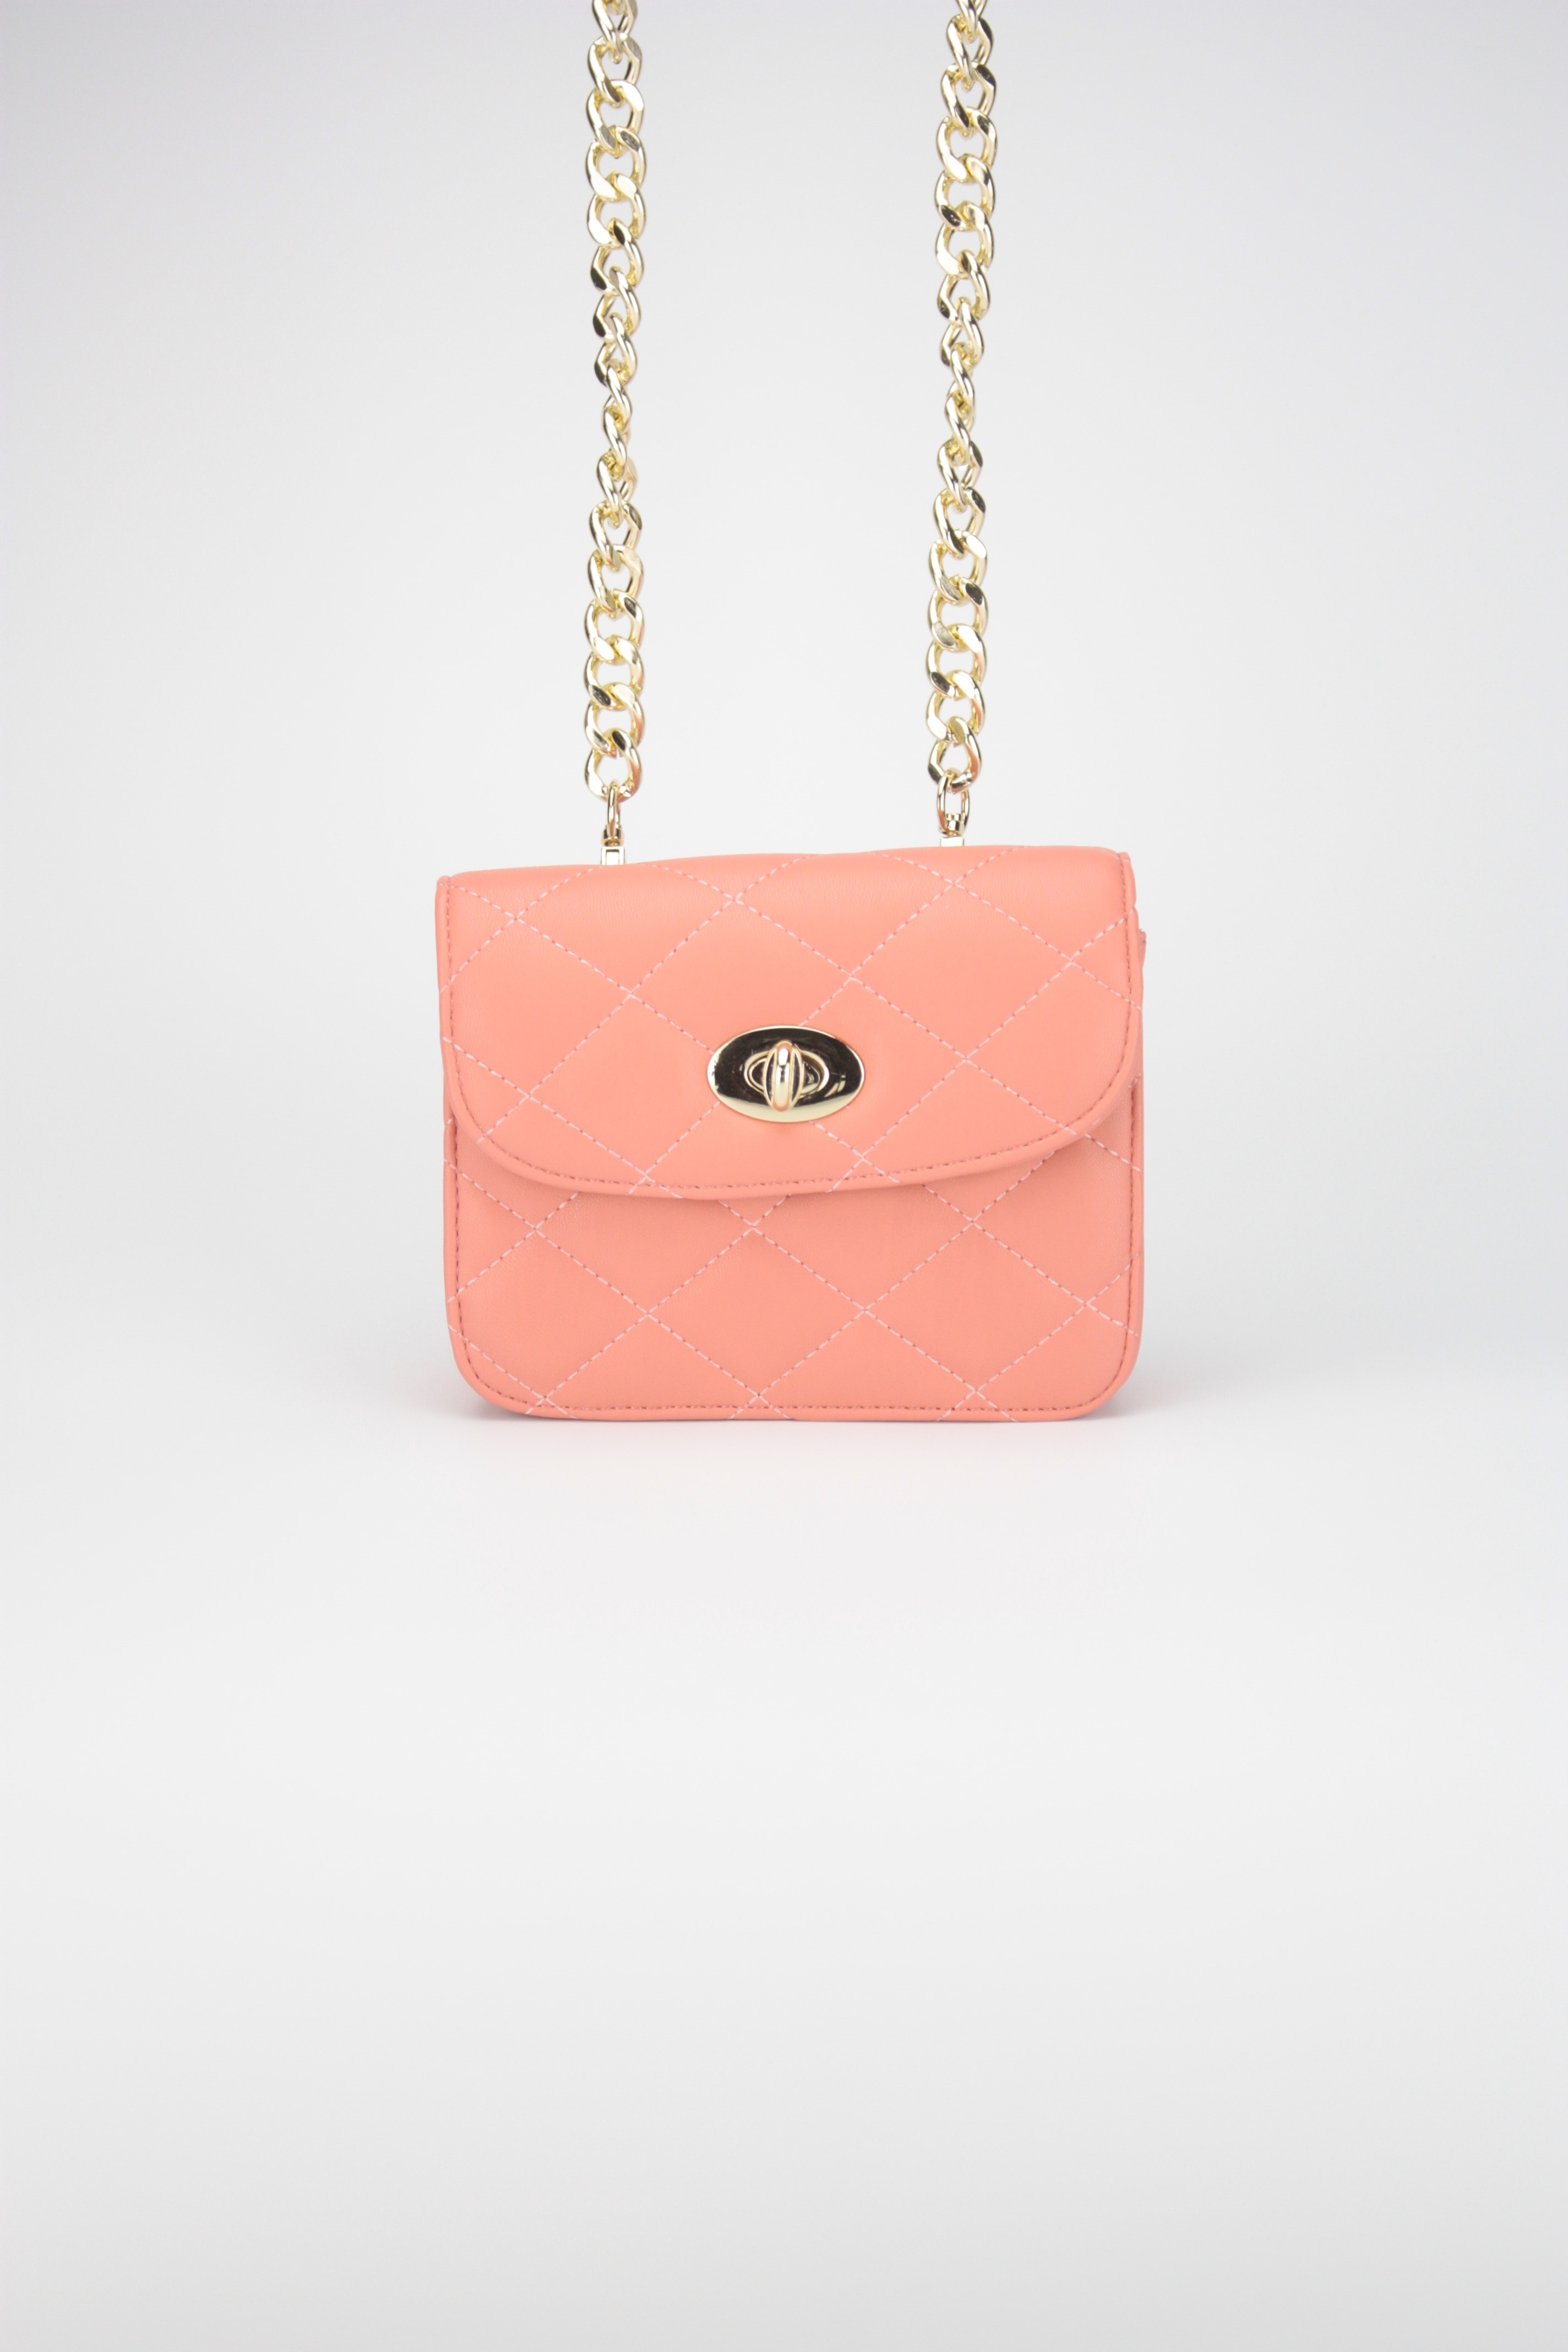 gold quilted pink leather bag